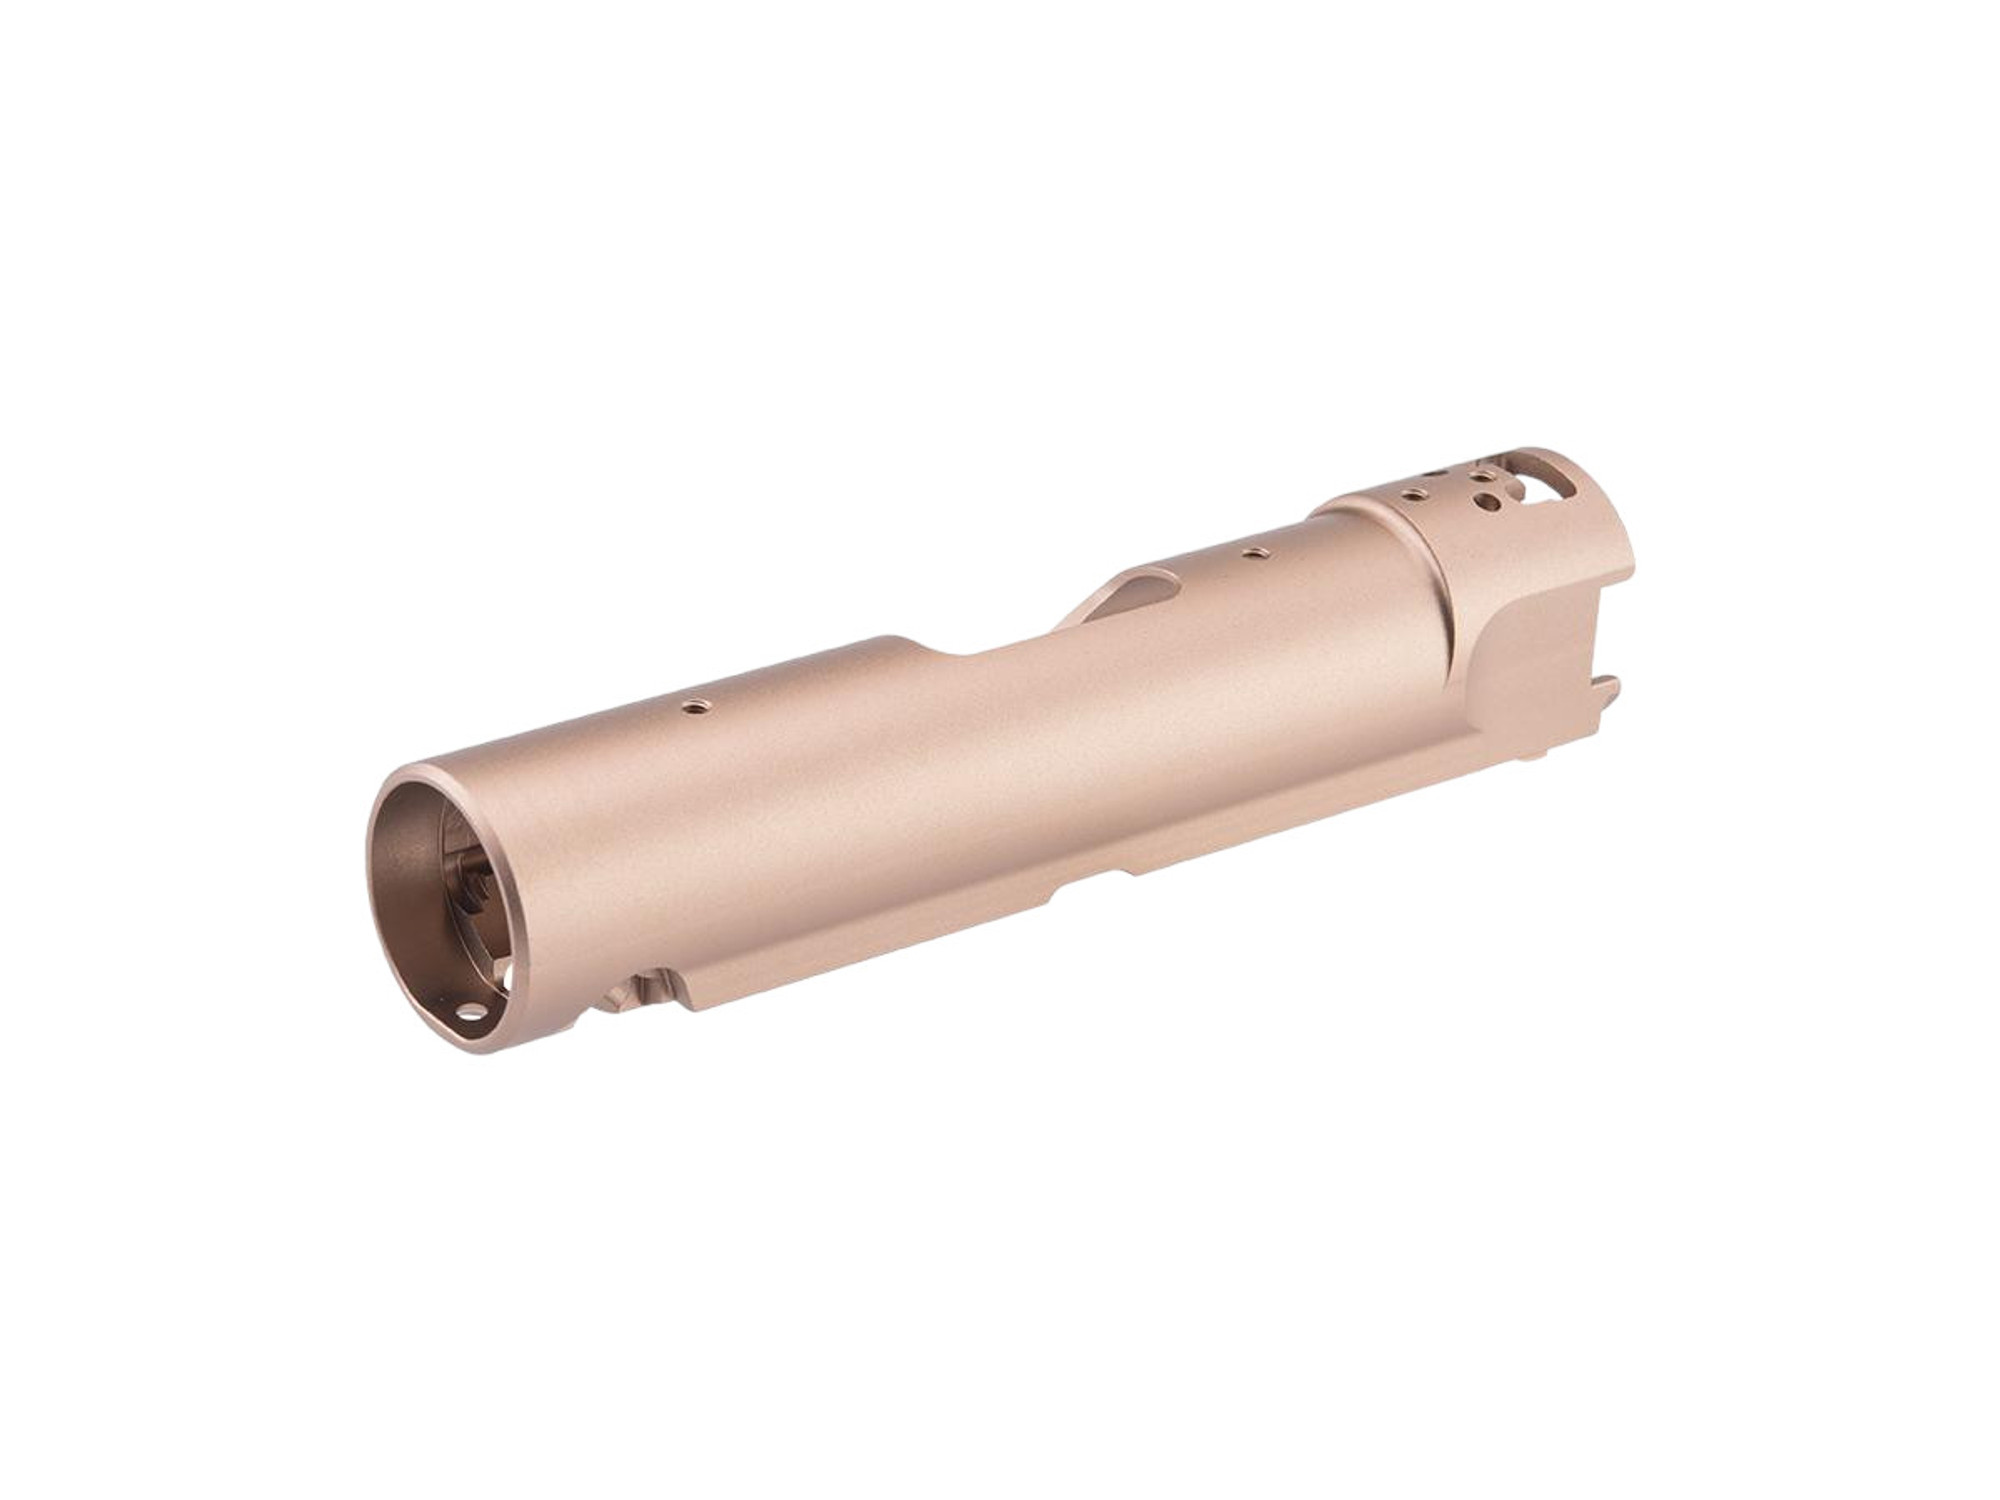 CTM CNC Type-A Upper Receiver for AAP-01 Gas Blowback Airsoft Pistols (Color: Rose Gold)